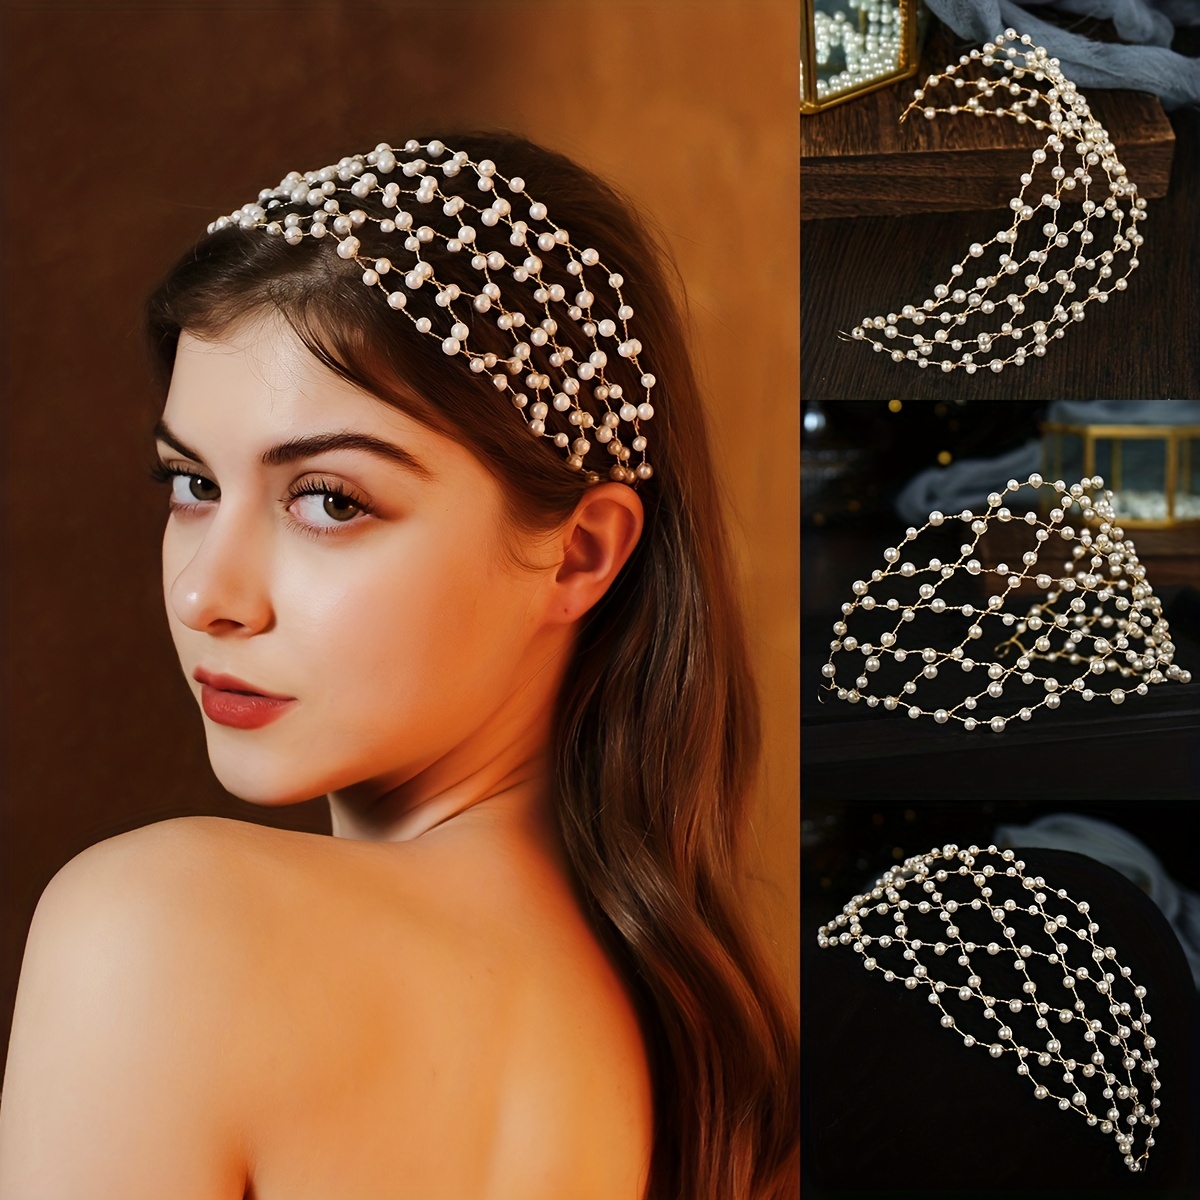 Birdcage veil with thick white pearl beaded headband for fashion